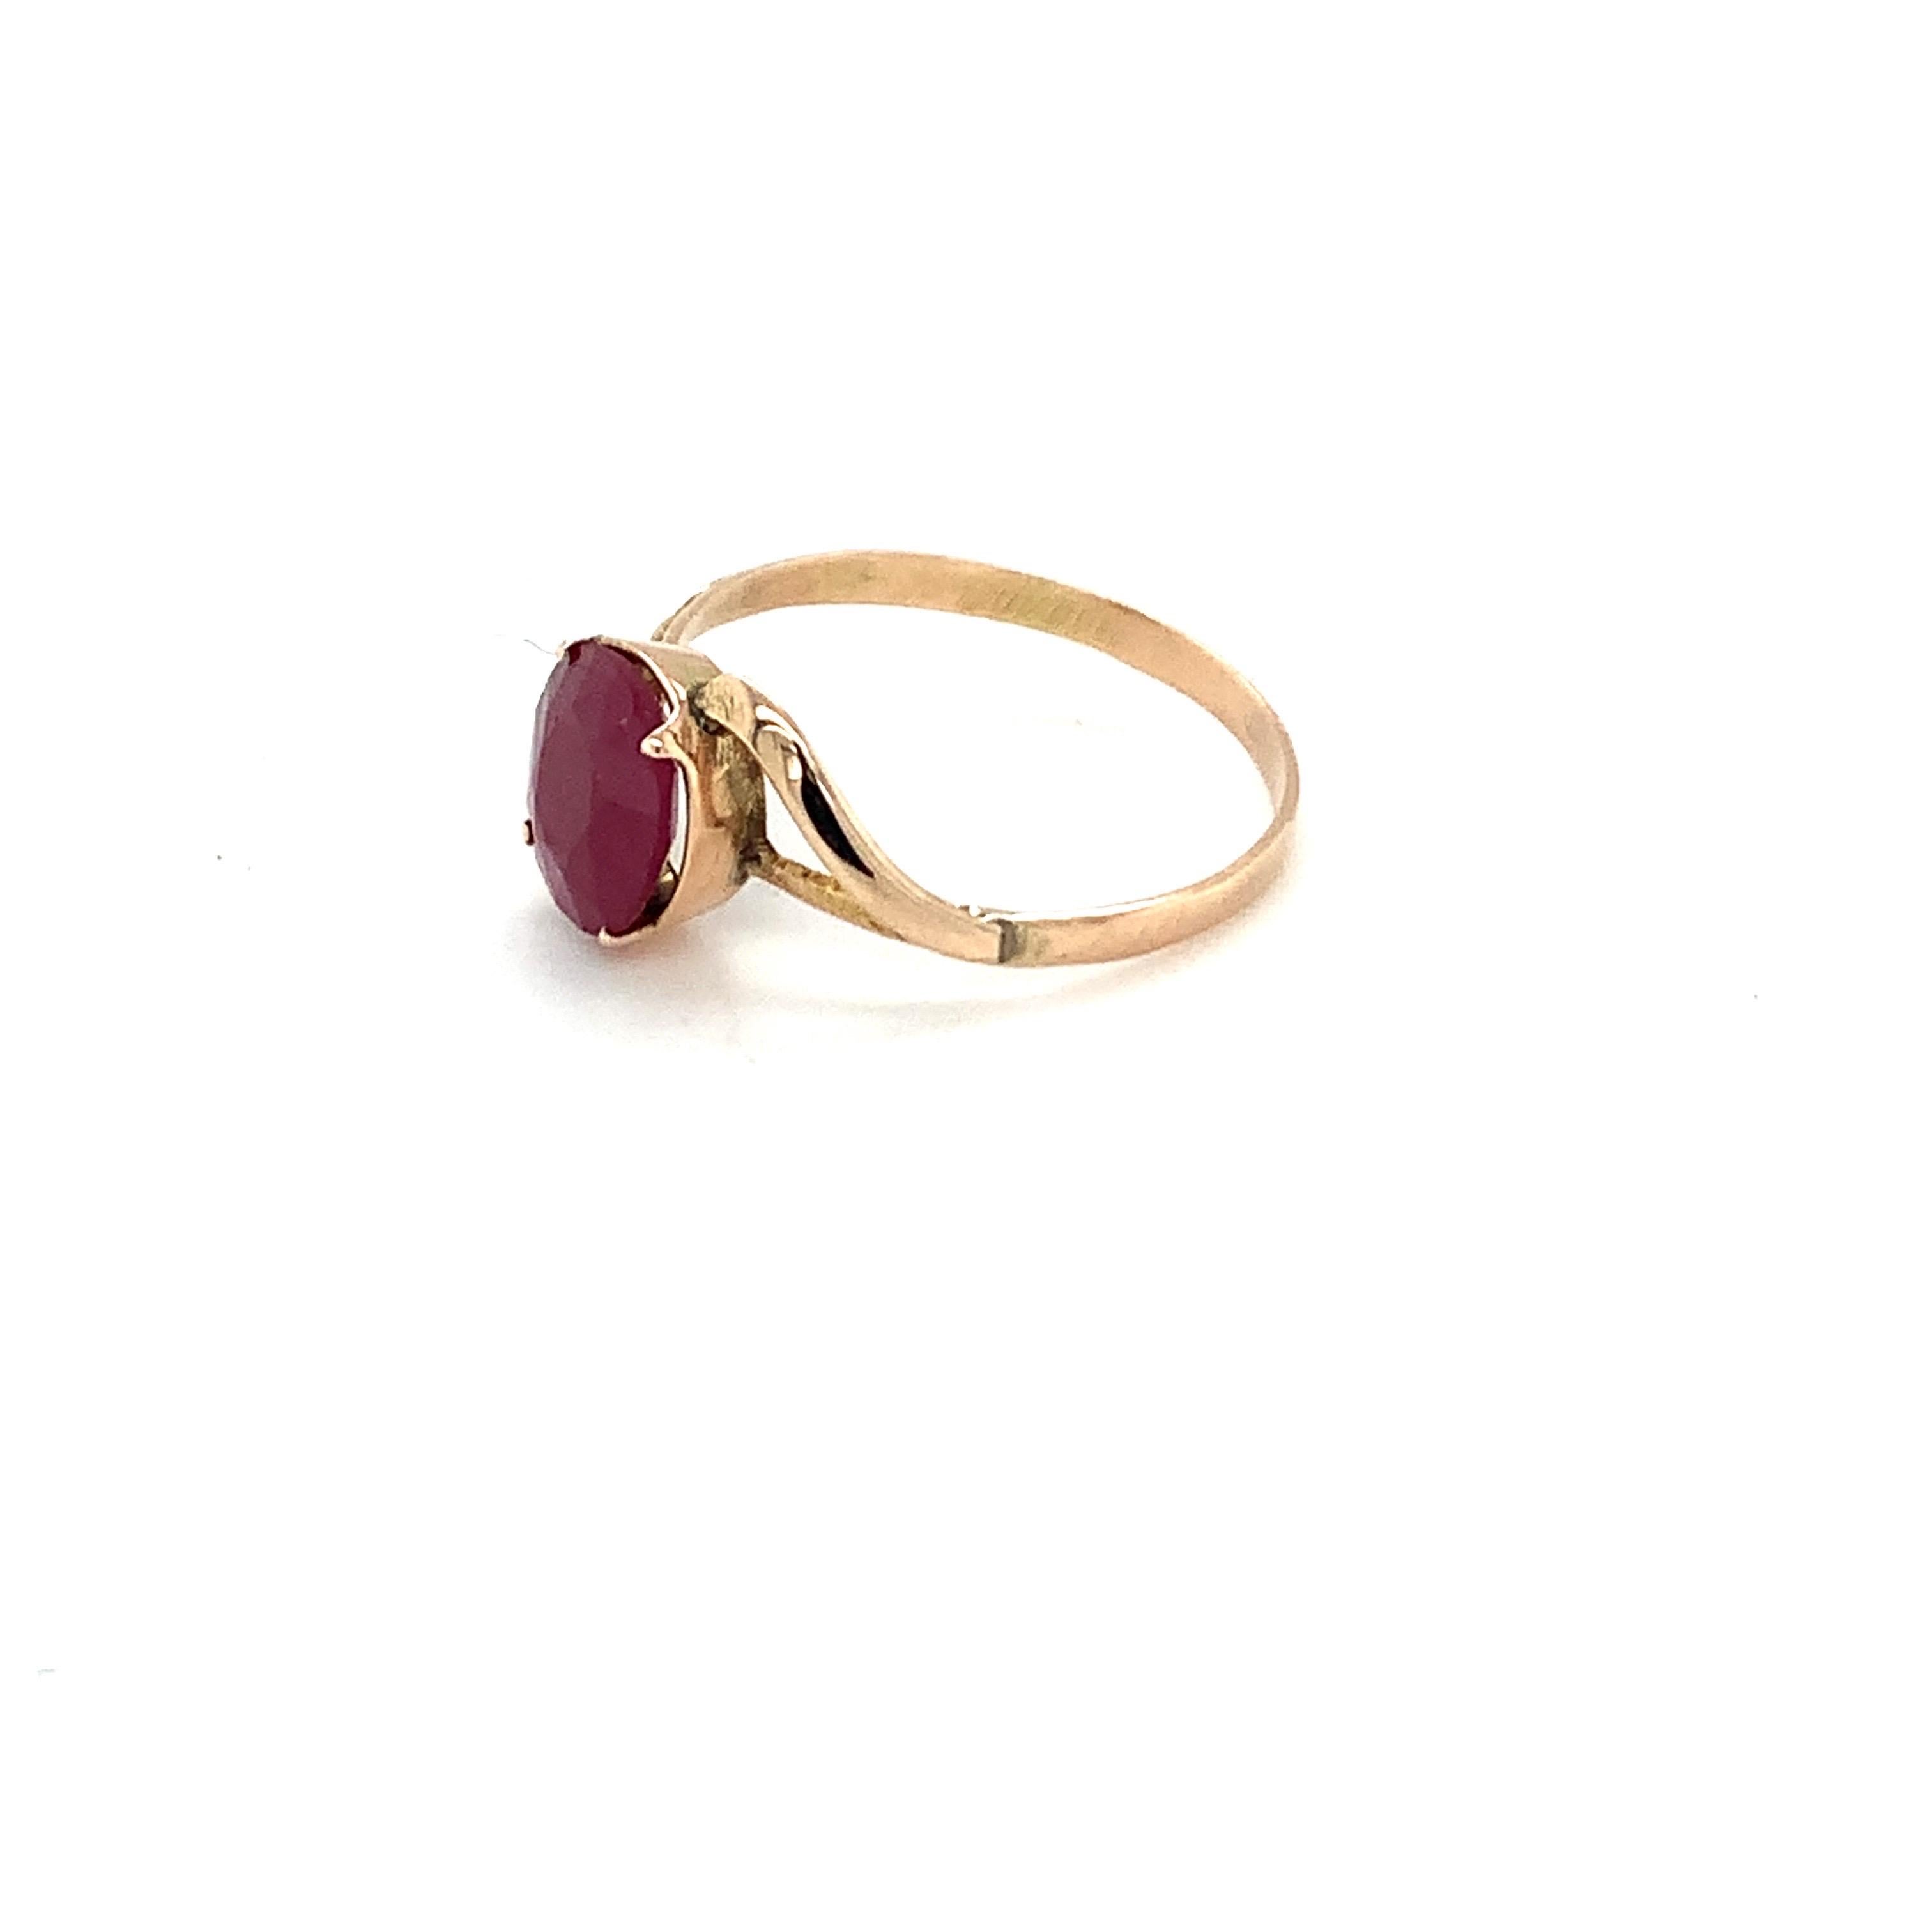 Hand cut and polished natural ruby ring is crafted with hand in 14K yellow gold thin band.
Ideal for casual daily wear.
Image is enlarged to get a closer view.
Ethically sourced gem stone.